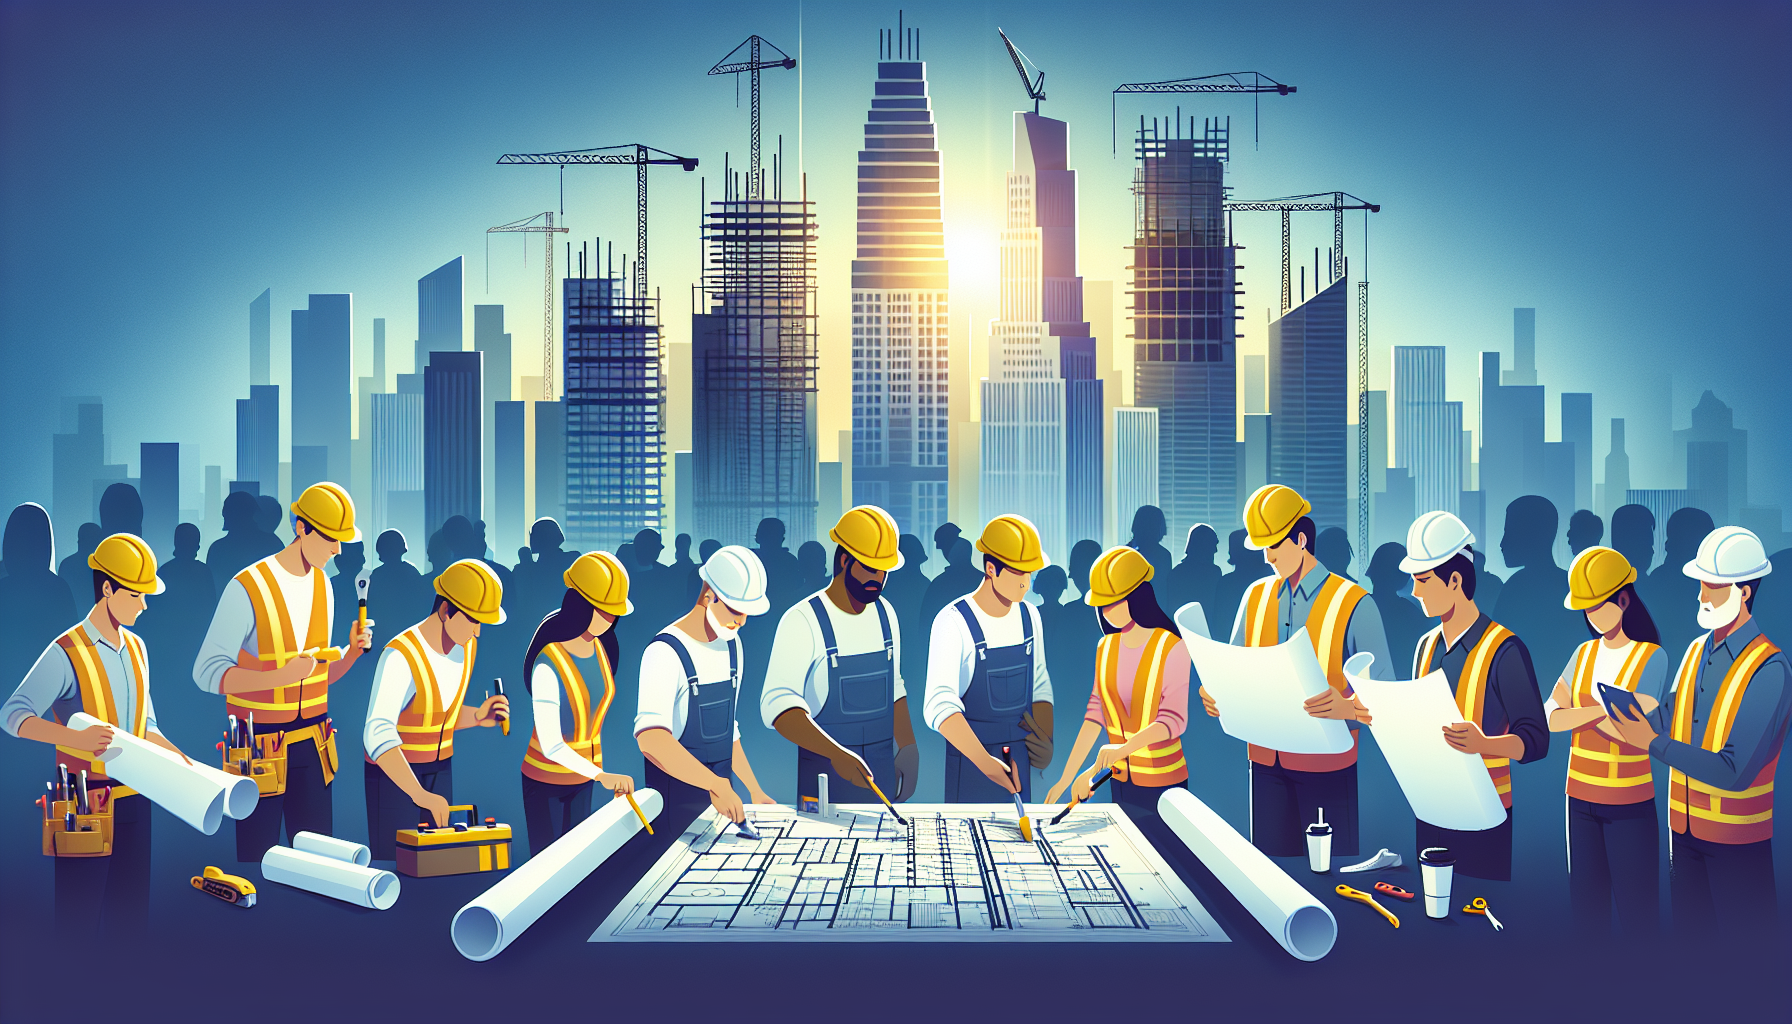 Company culture and core values in construction industry